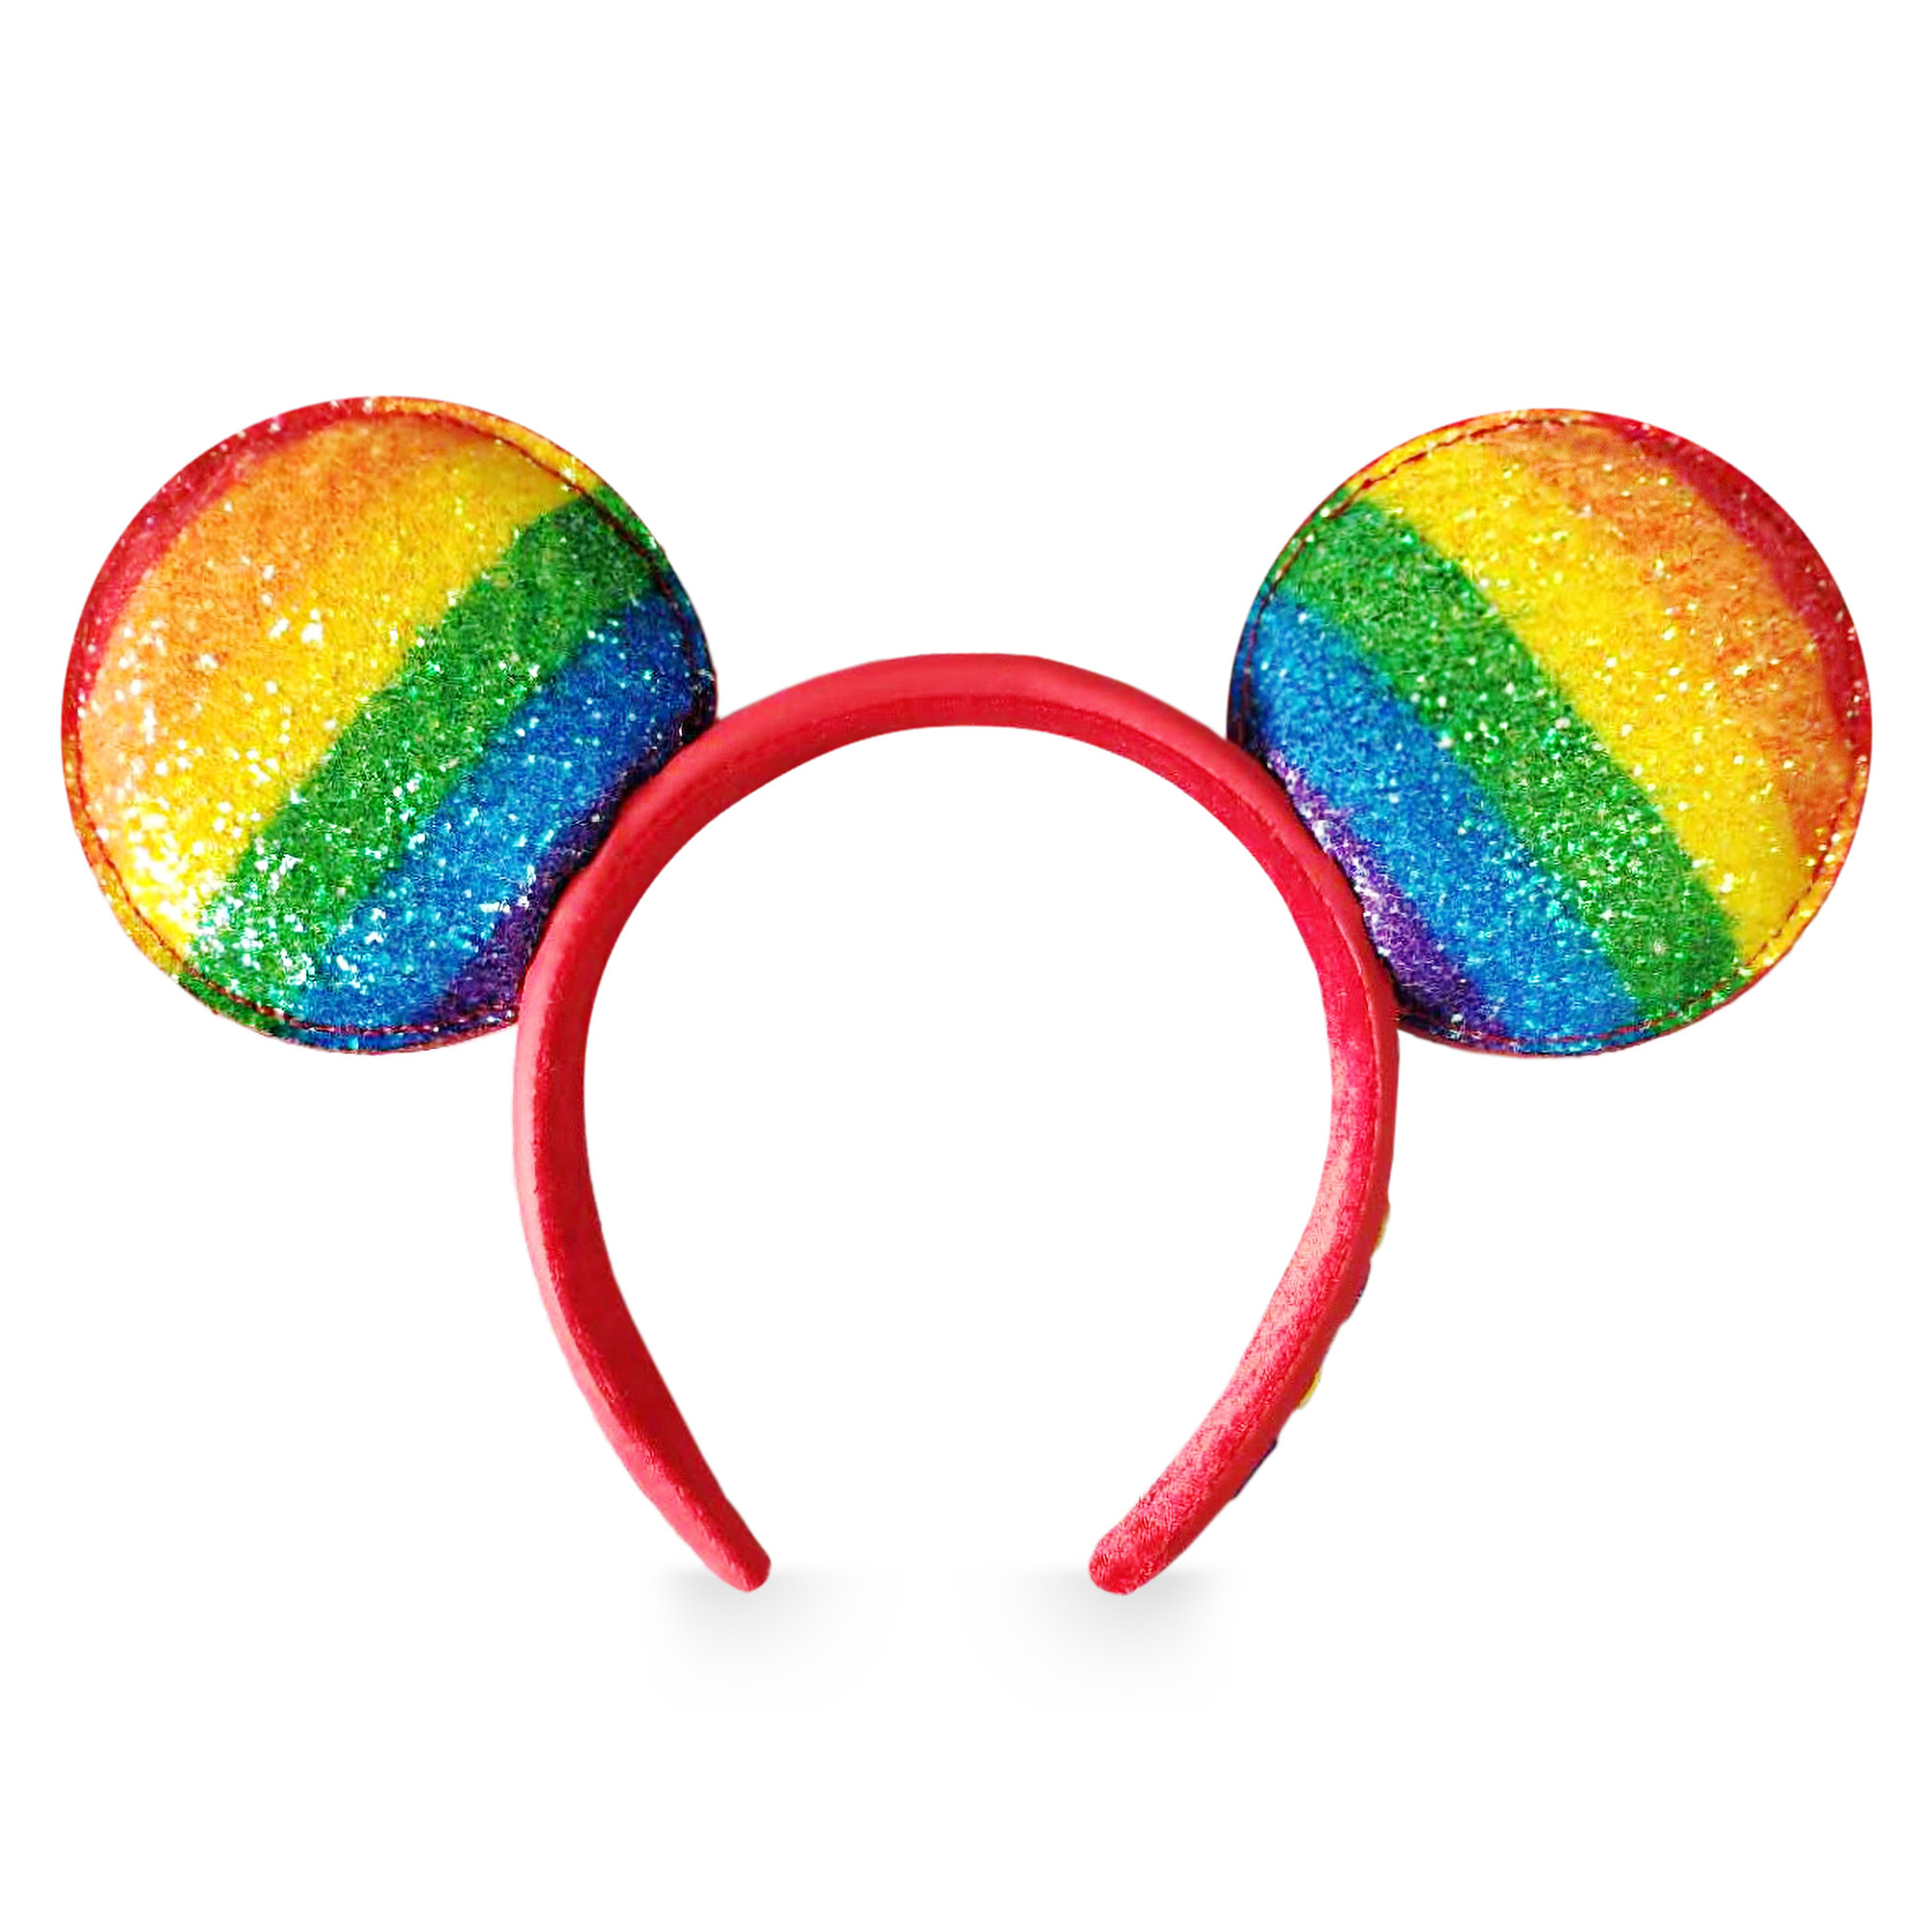 The Rainbow Disney Collection For Pride Is Here And It's A Lovely